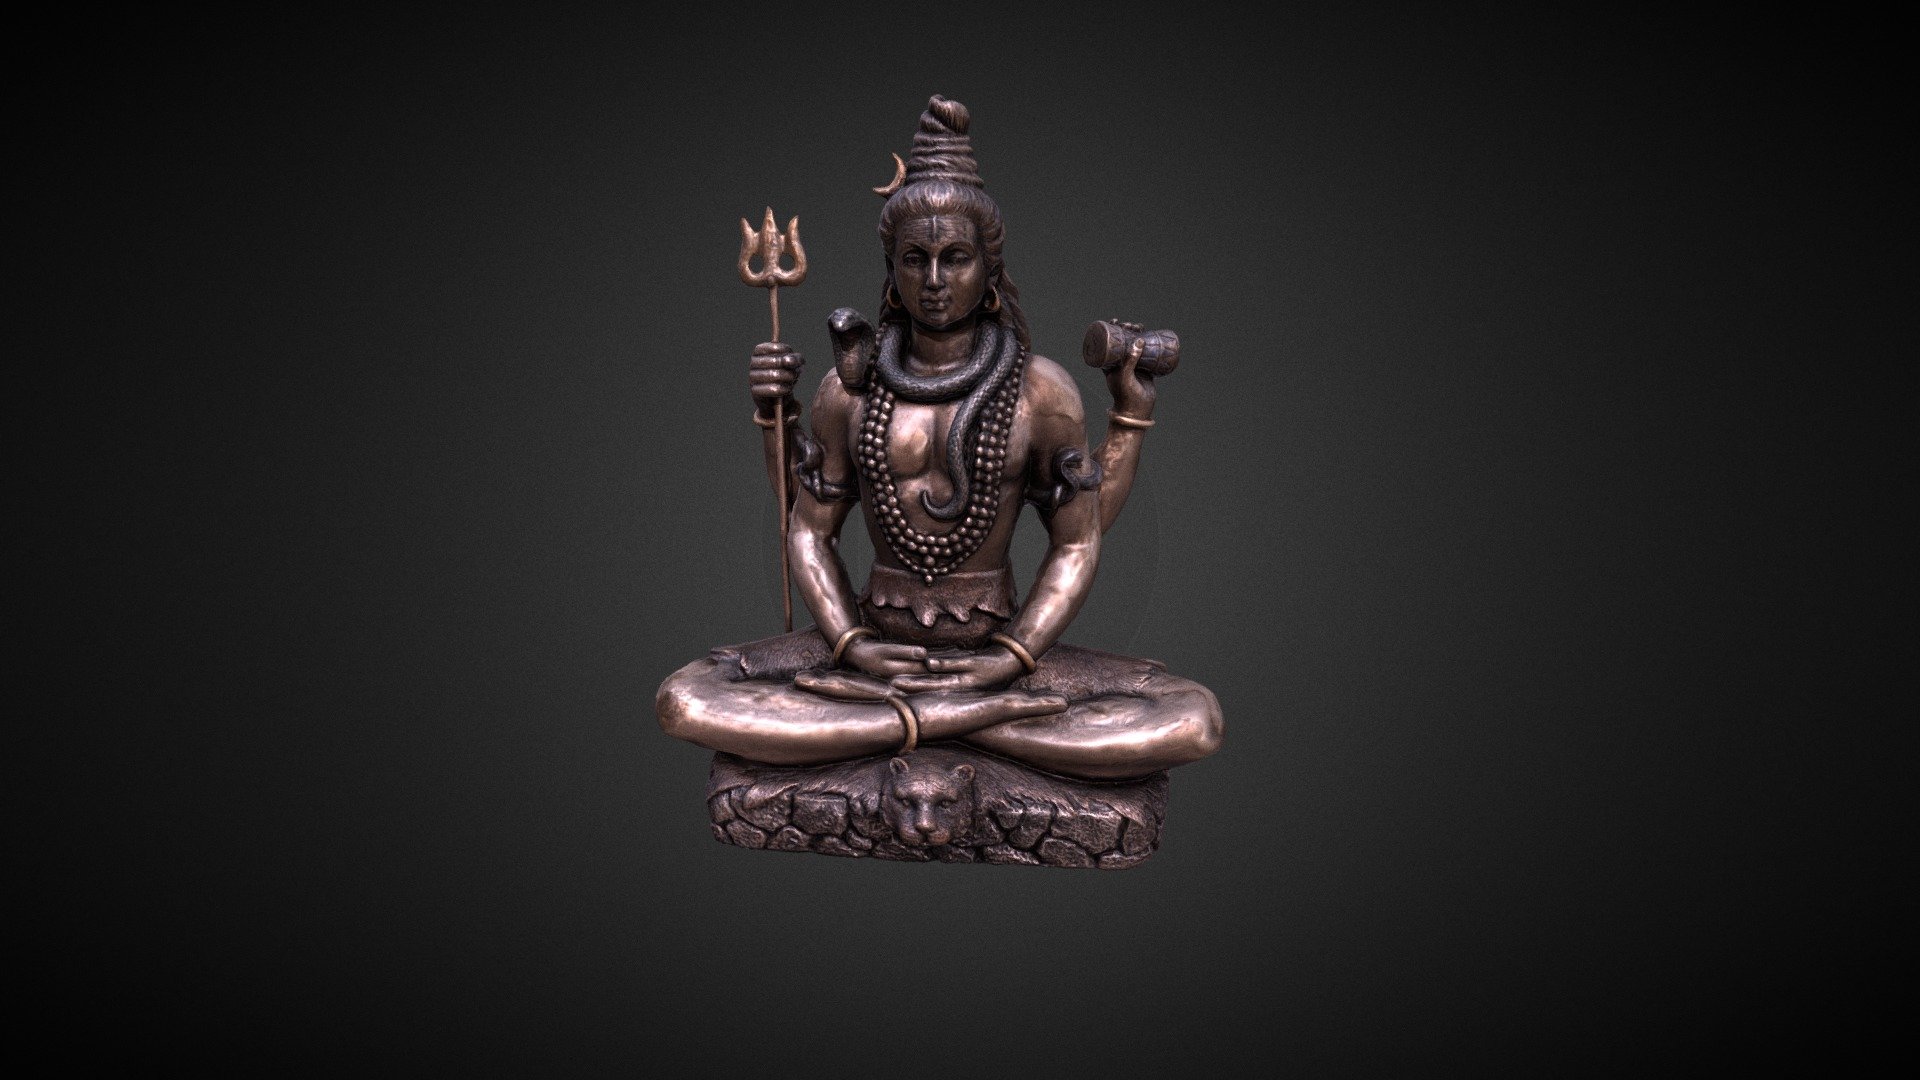 A little Photogrammetry from my Shiva's statue. Its like 15 cm high, not really huge. and yeah i know Metal is not really great for photogrammetry, but i wanted to doing it 3d model